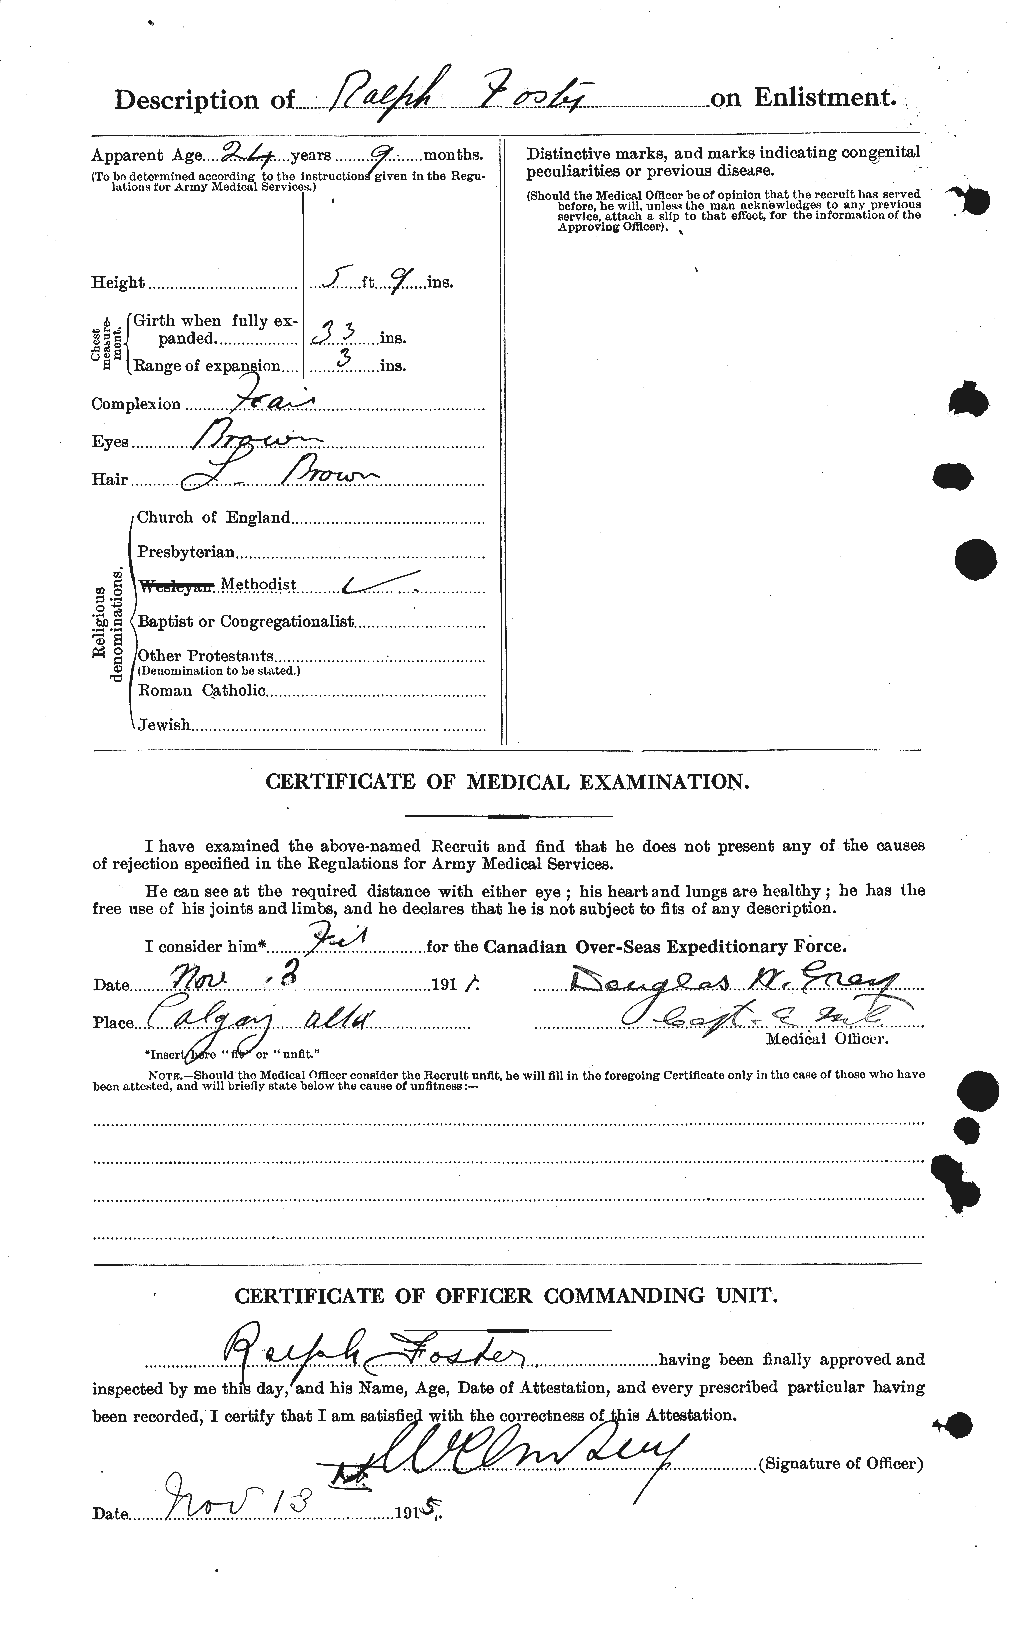 Personnel Records of the First World War - CEF 333448b